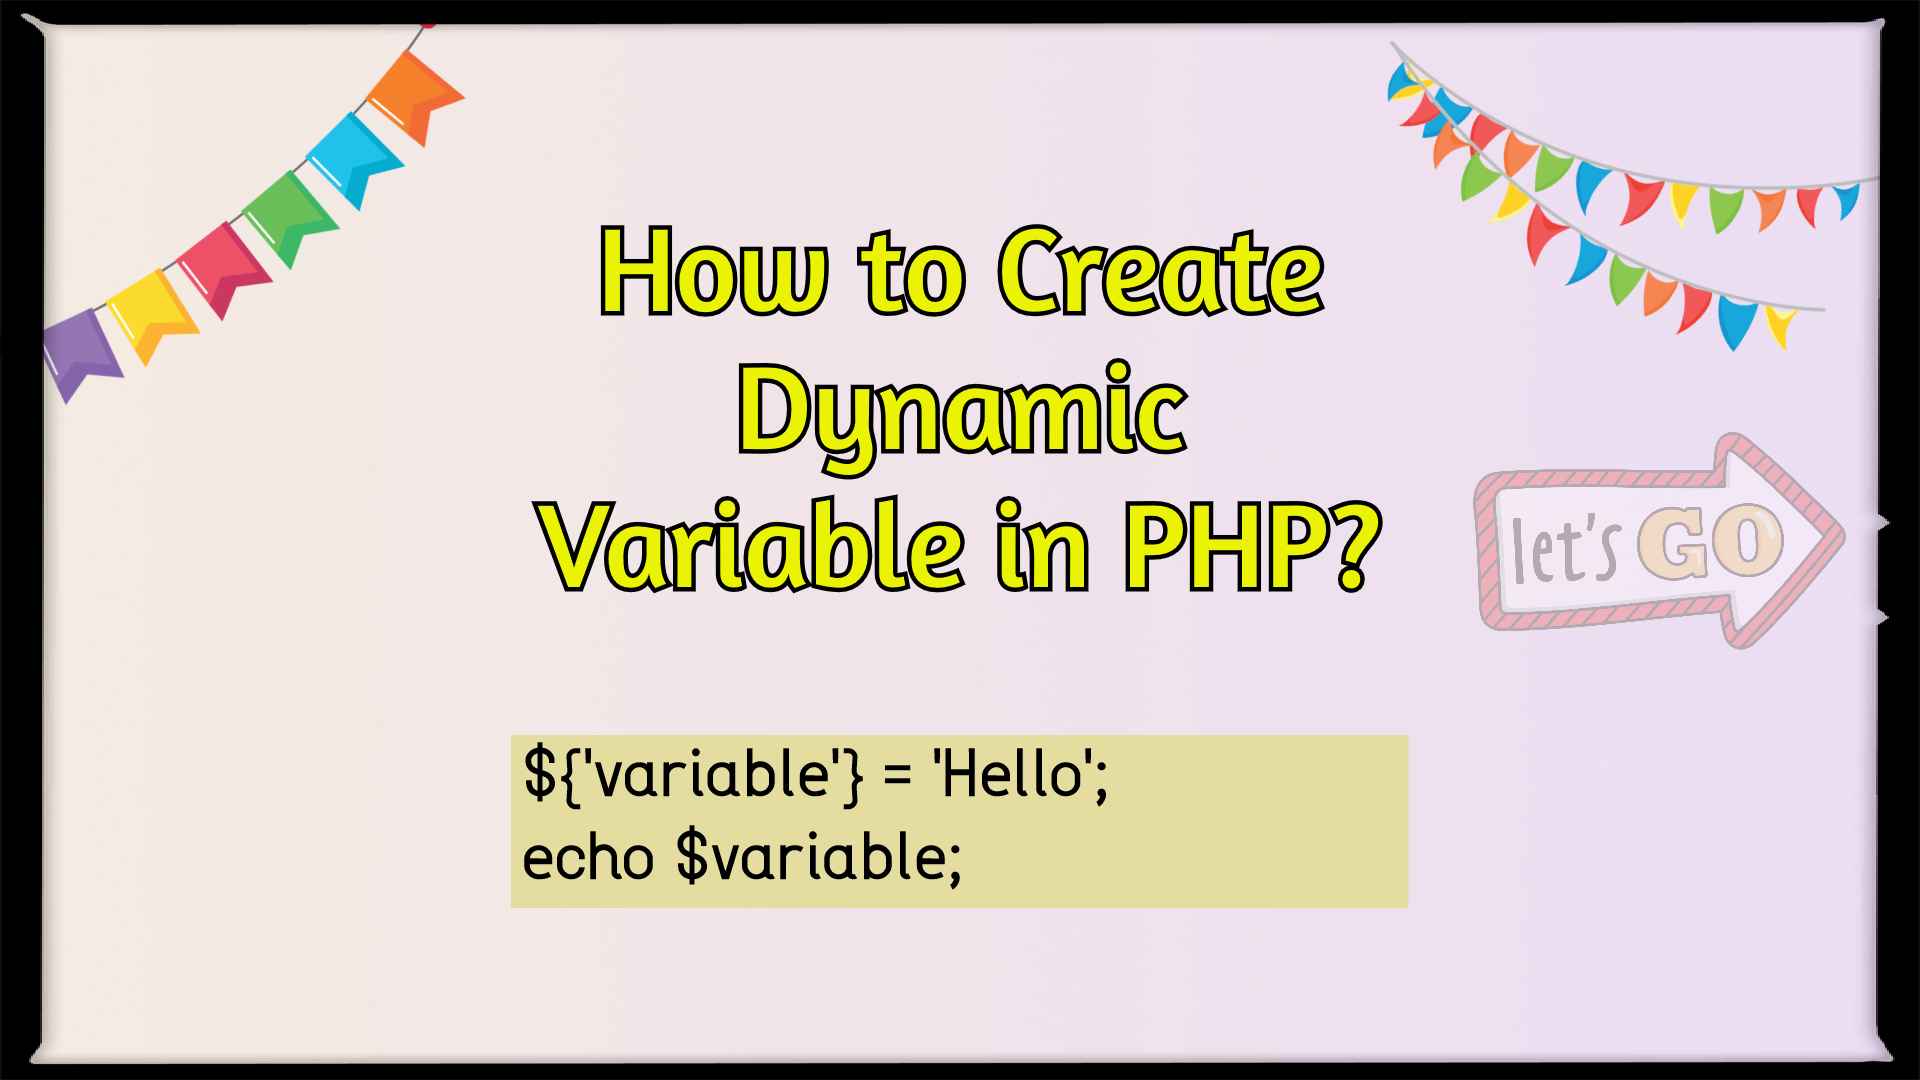 create dynamic variable in PHP